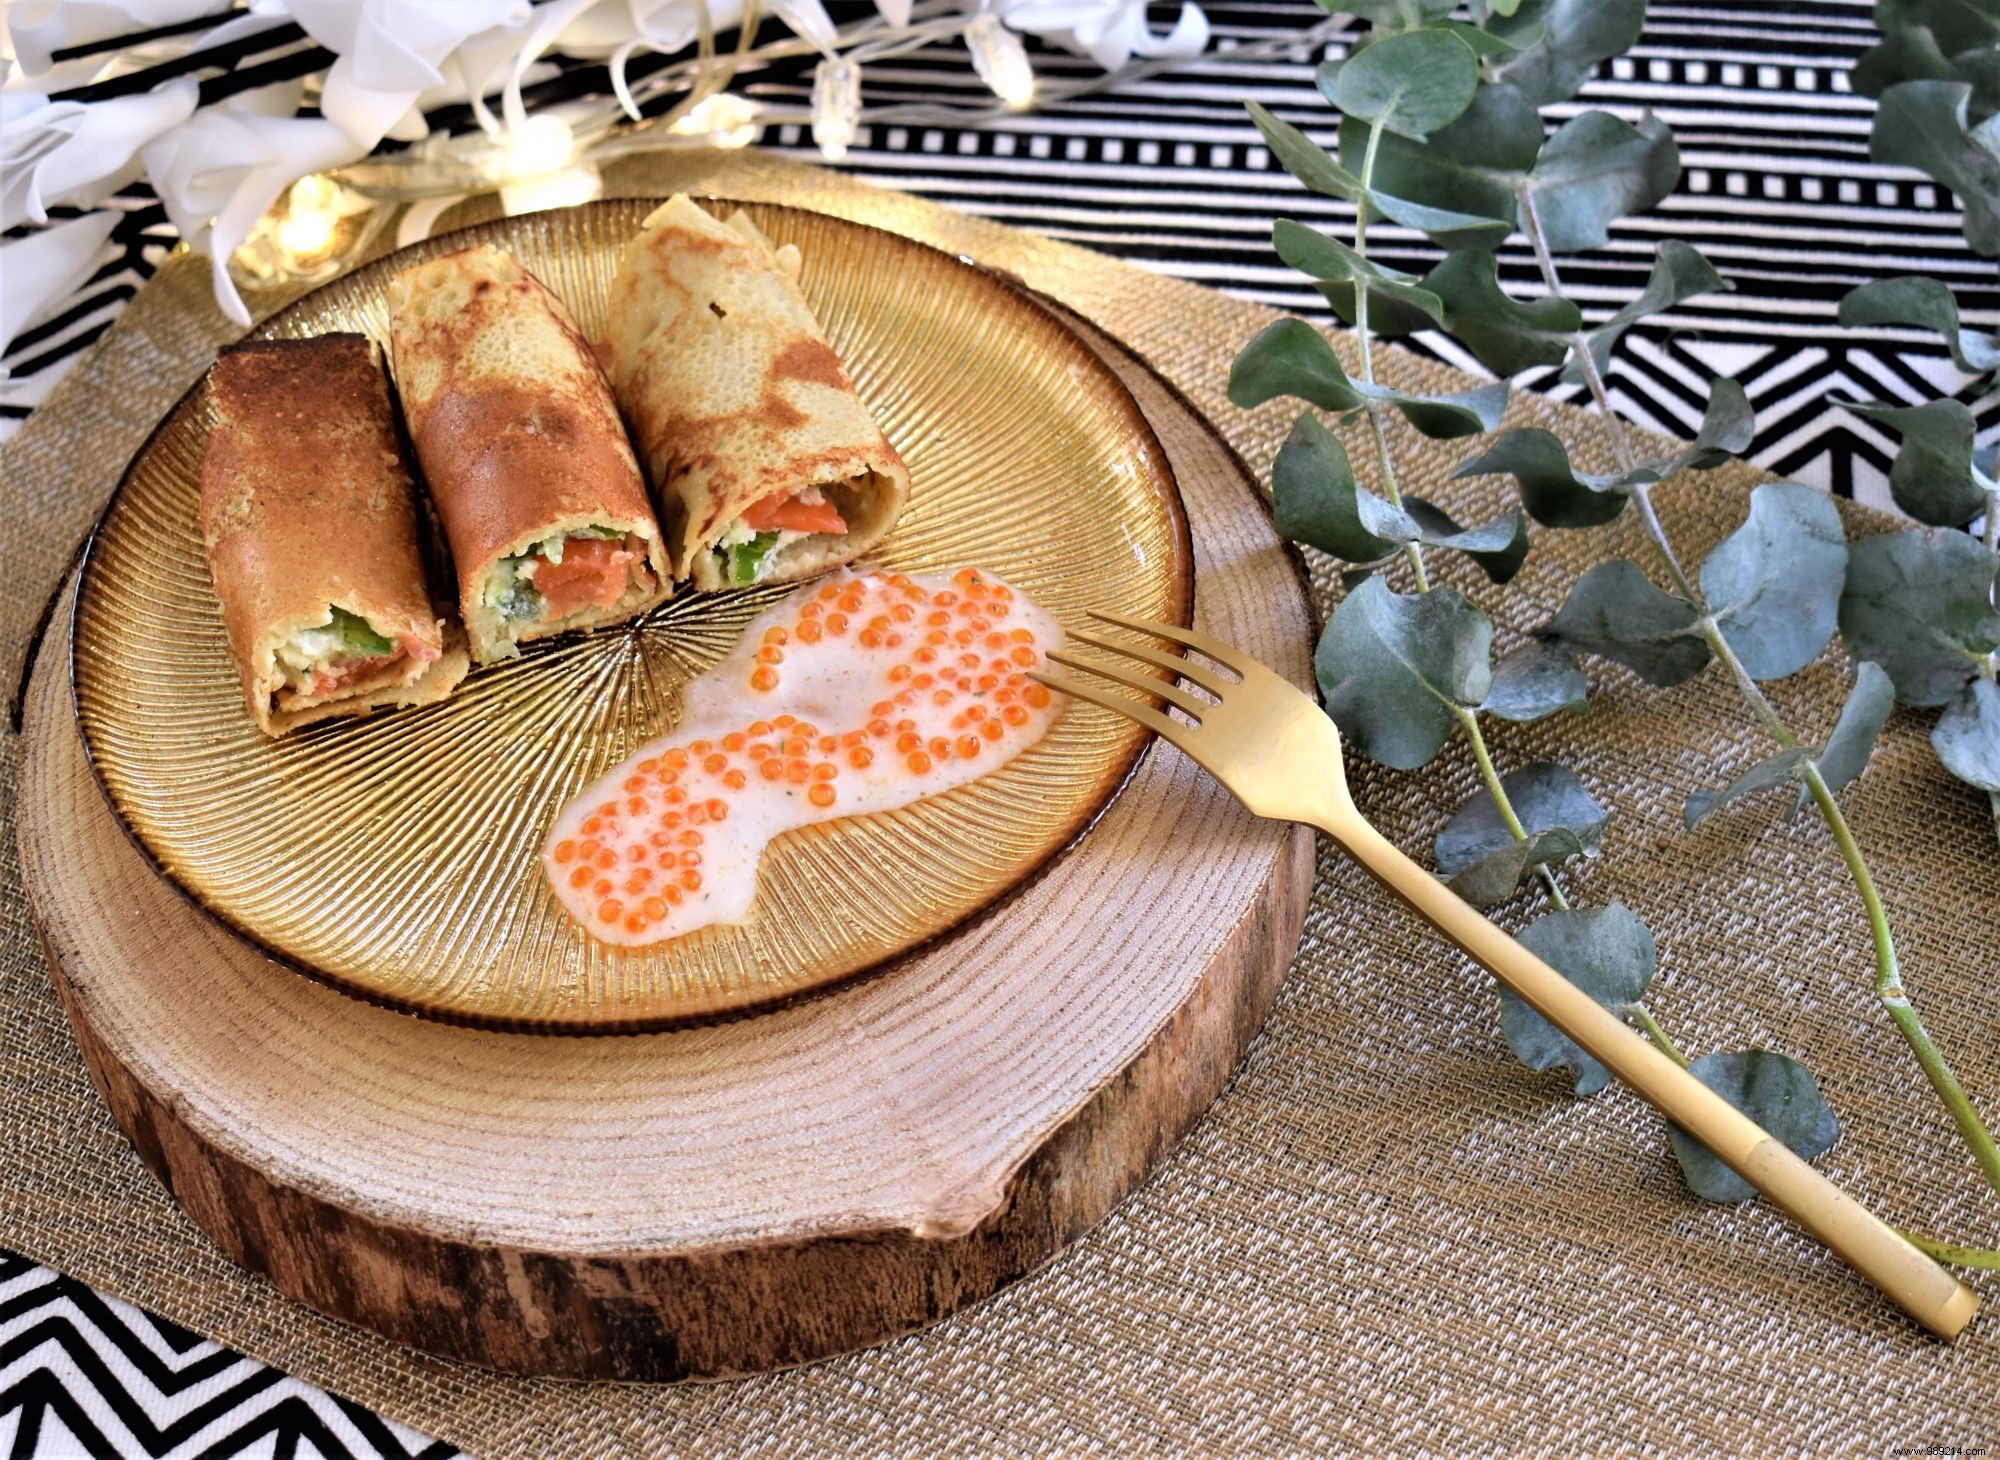 Pancakes rolled with smoked trout (gluten-free &lactose-free) 